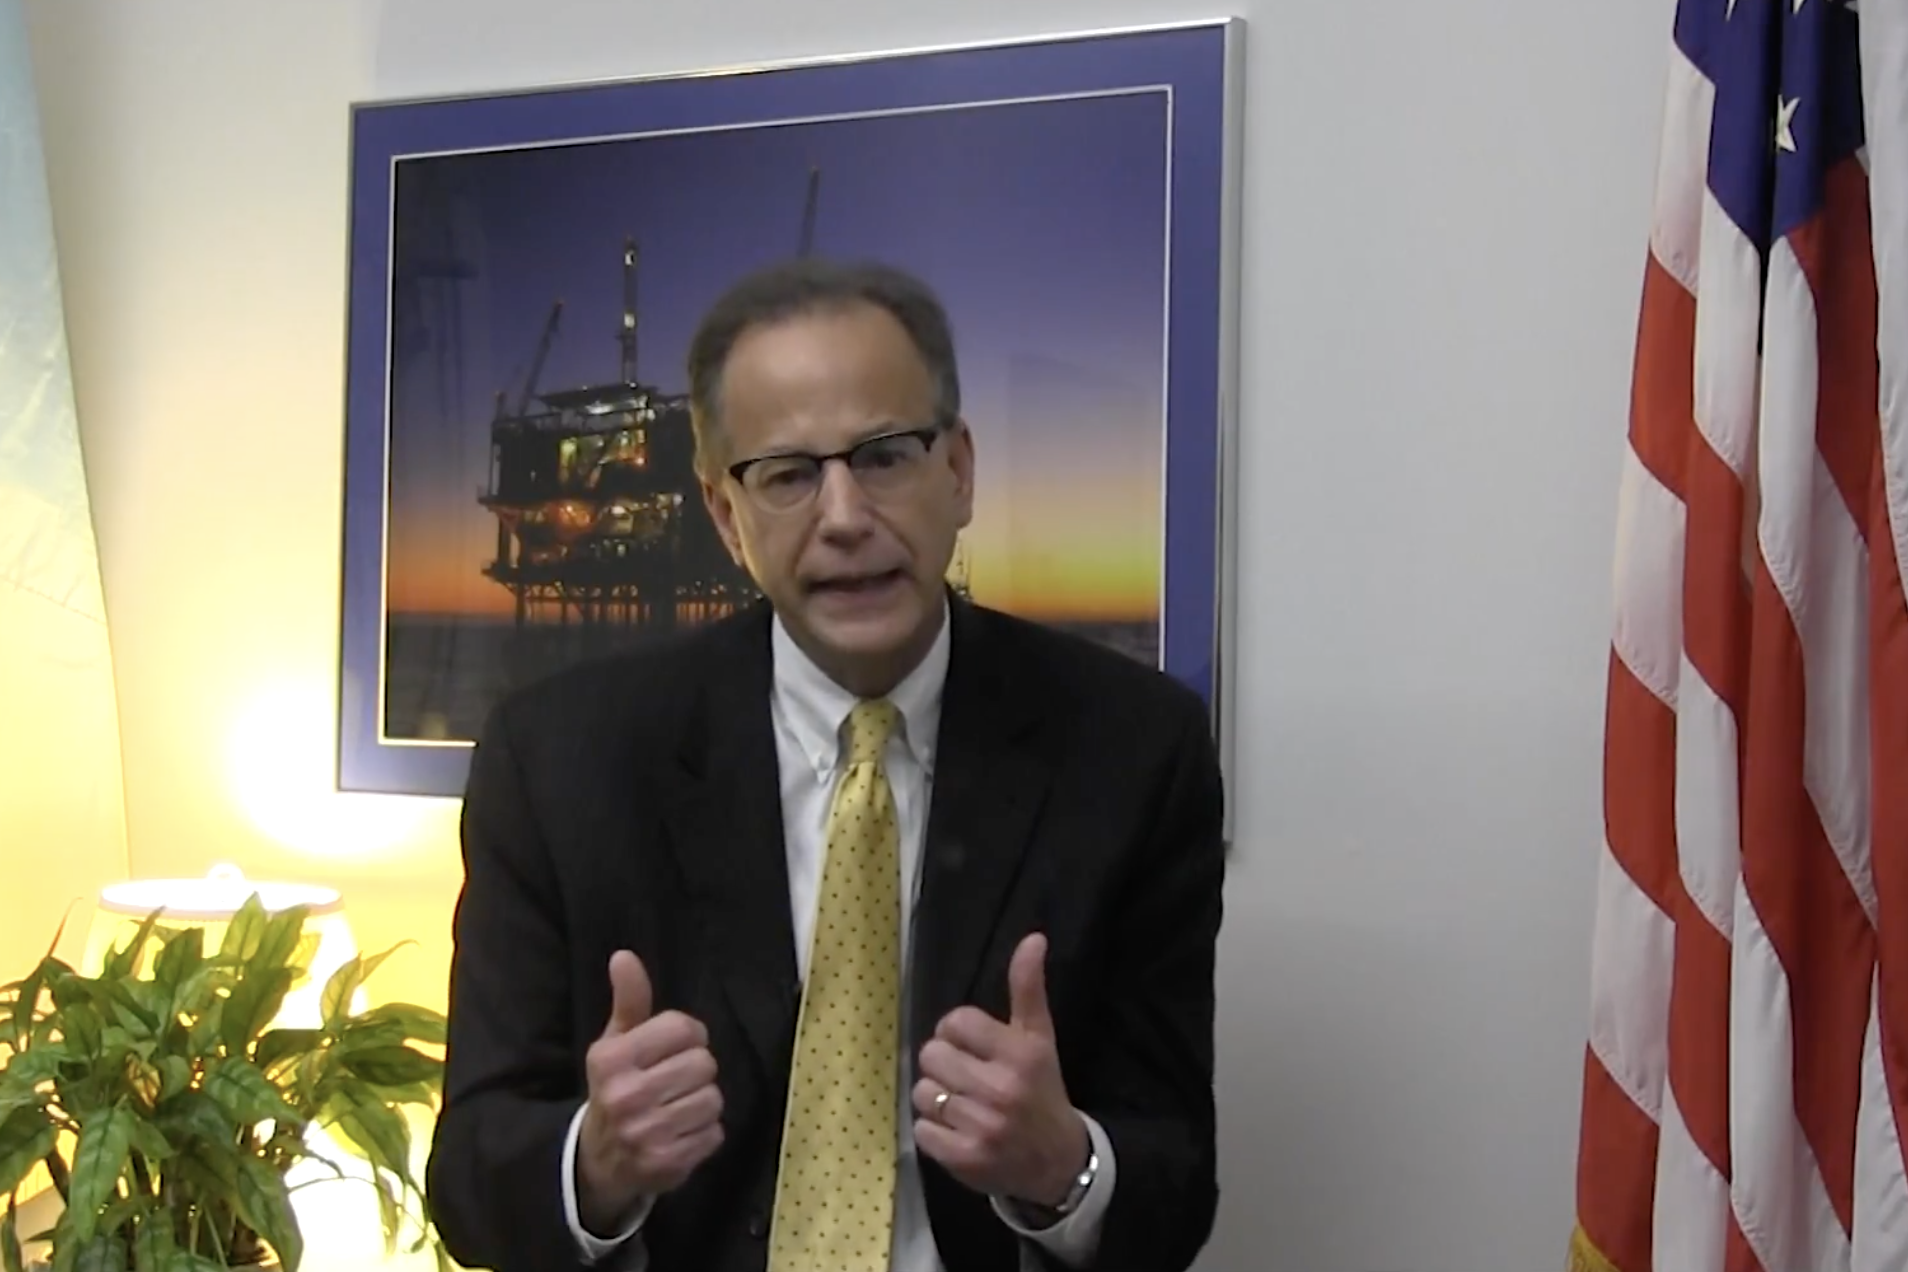 Scott Angelle gives a thumbs=up in front of photo of an oil rig